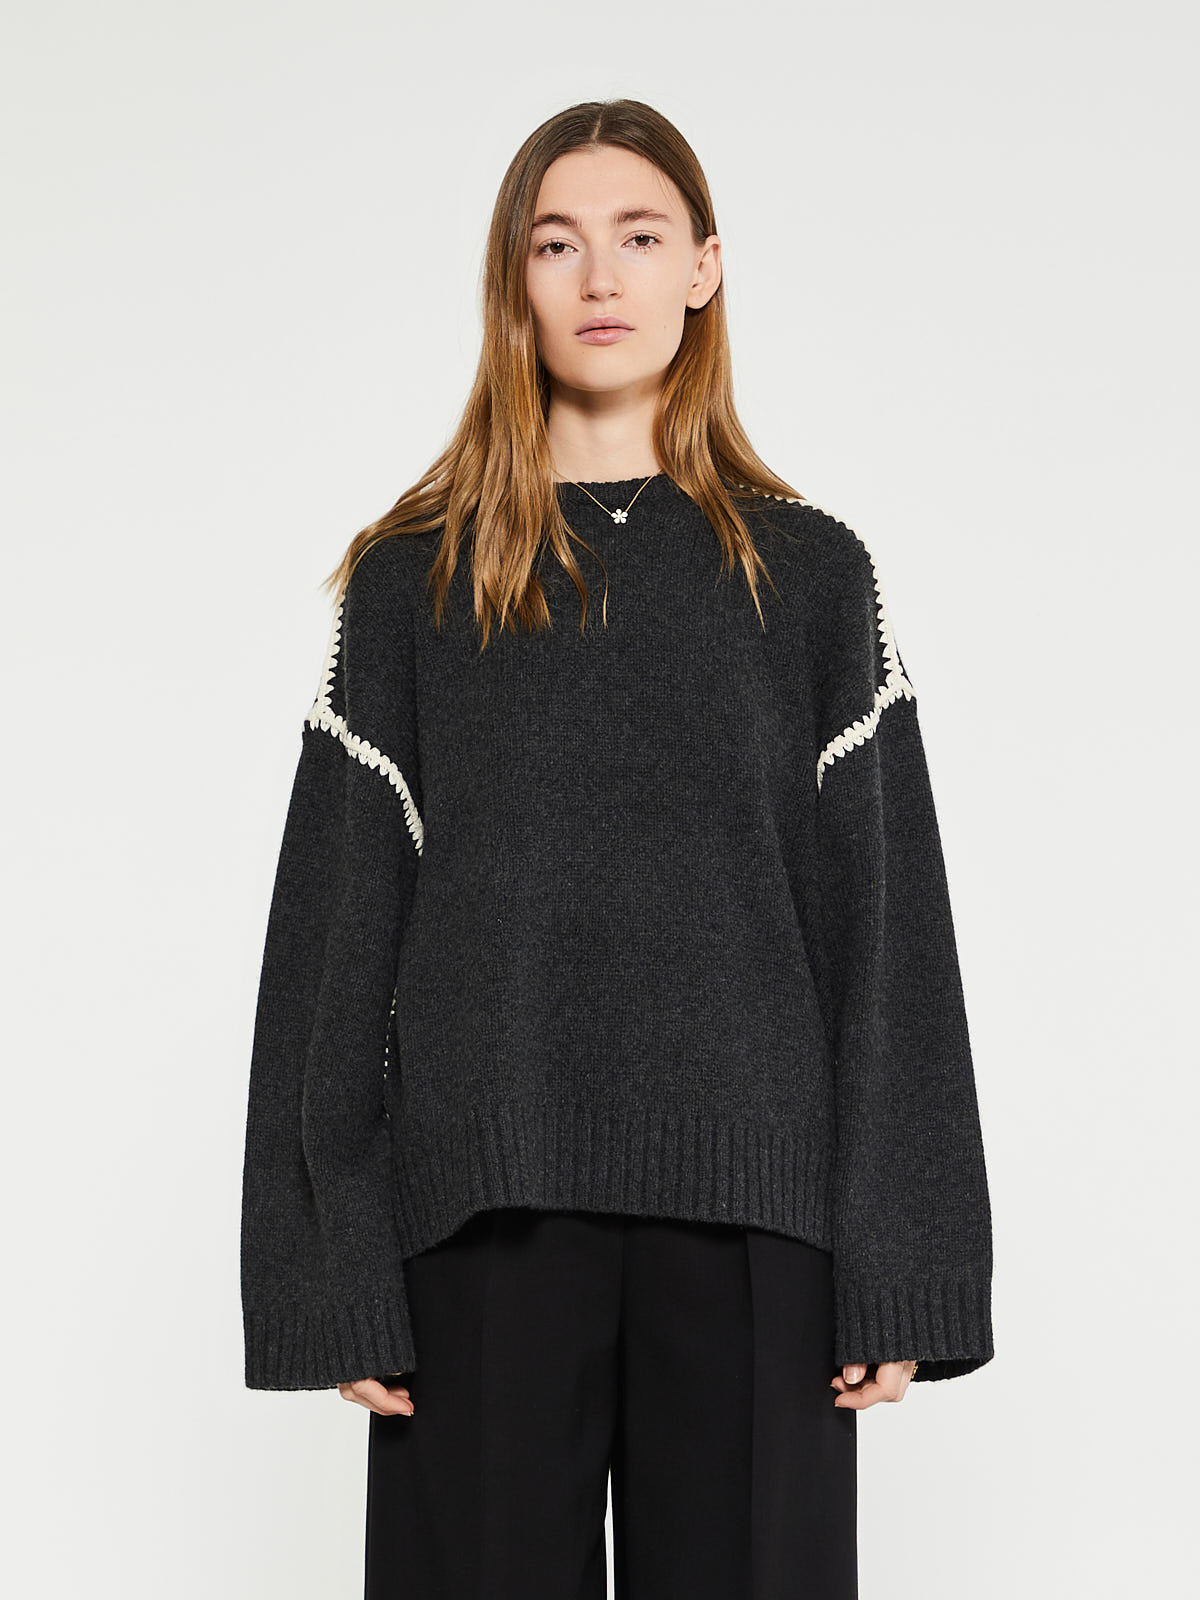 TOTEME - Embroidered Wool Cashmere Knit in Grey Melange